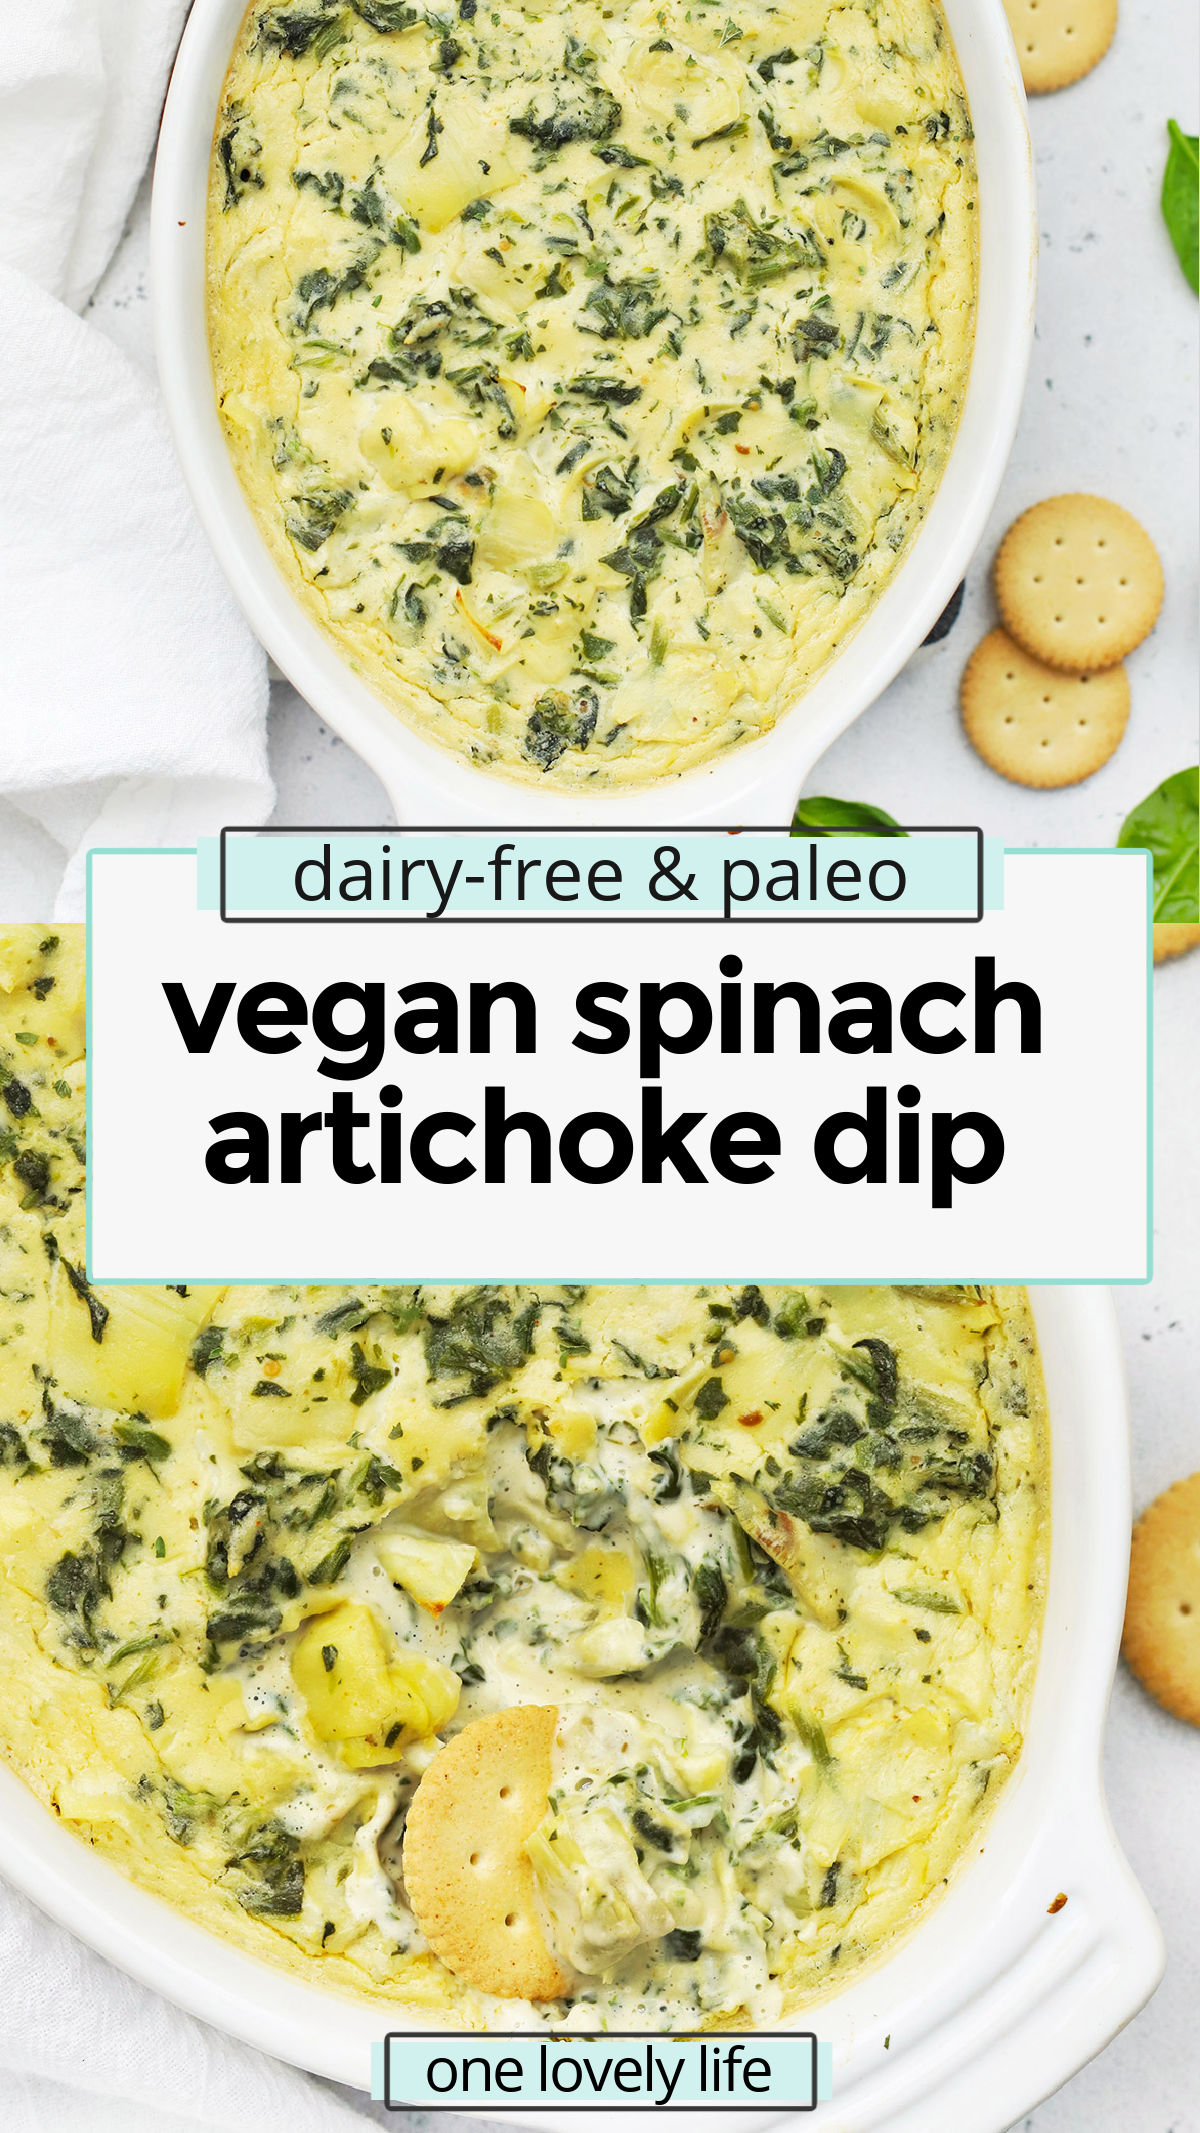 Vegan Artichoke Dip - Our vegan spinach artichoke dip is warm, cozy, and delicious. It's a perfect holiday or party appetizer and goes great with crackers, sliced baguettes, and more! (Dairy-Free, Paleo) // Paleo Artichoke Dip // Paleo Spinach Artichoke Dip // Dairy-Free Artichoke Dip // Paleo Appetizer // Vegan Appetizer // Dairy Free Spinach Artichoke Dip // Paleo Spinach Artichoke Dip